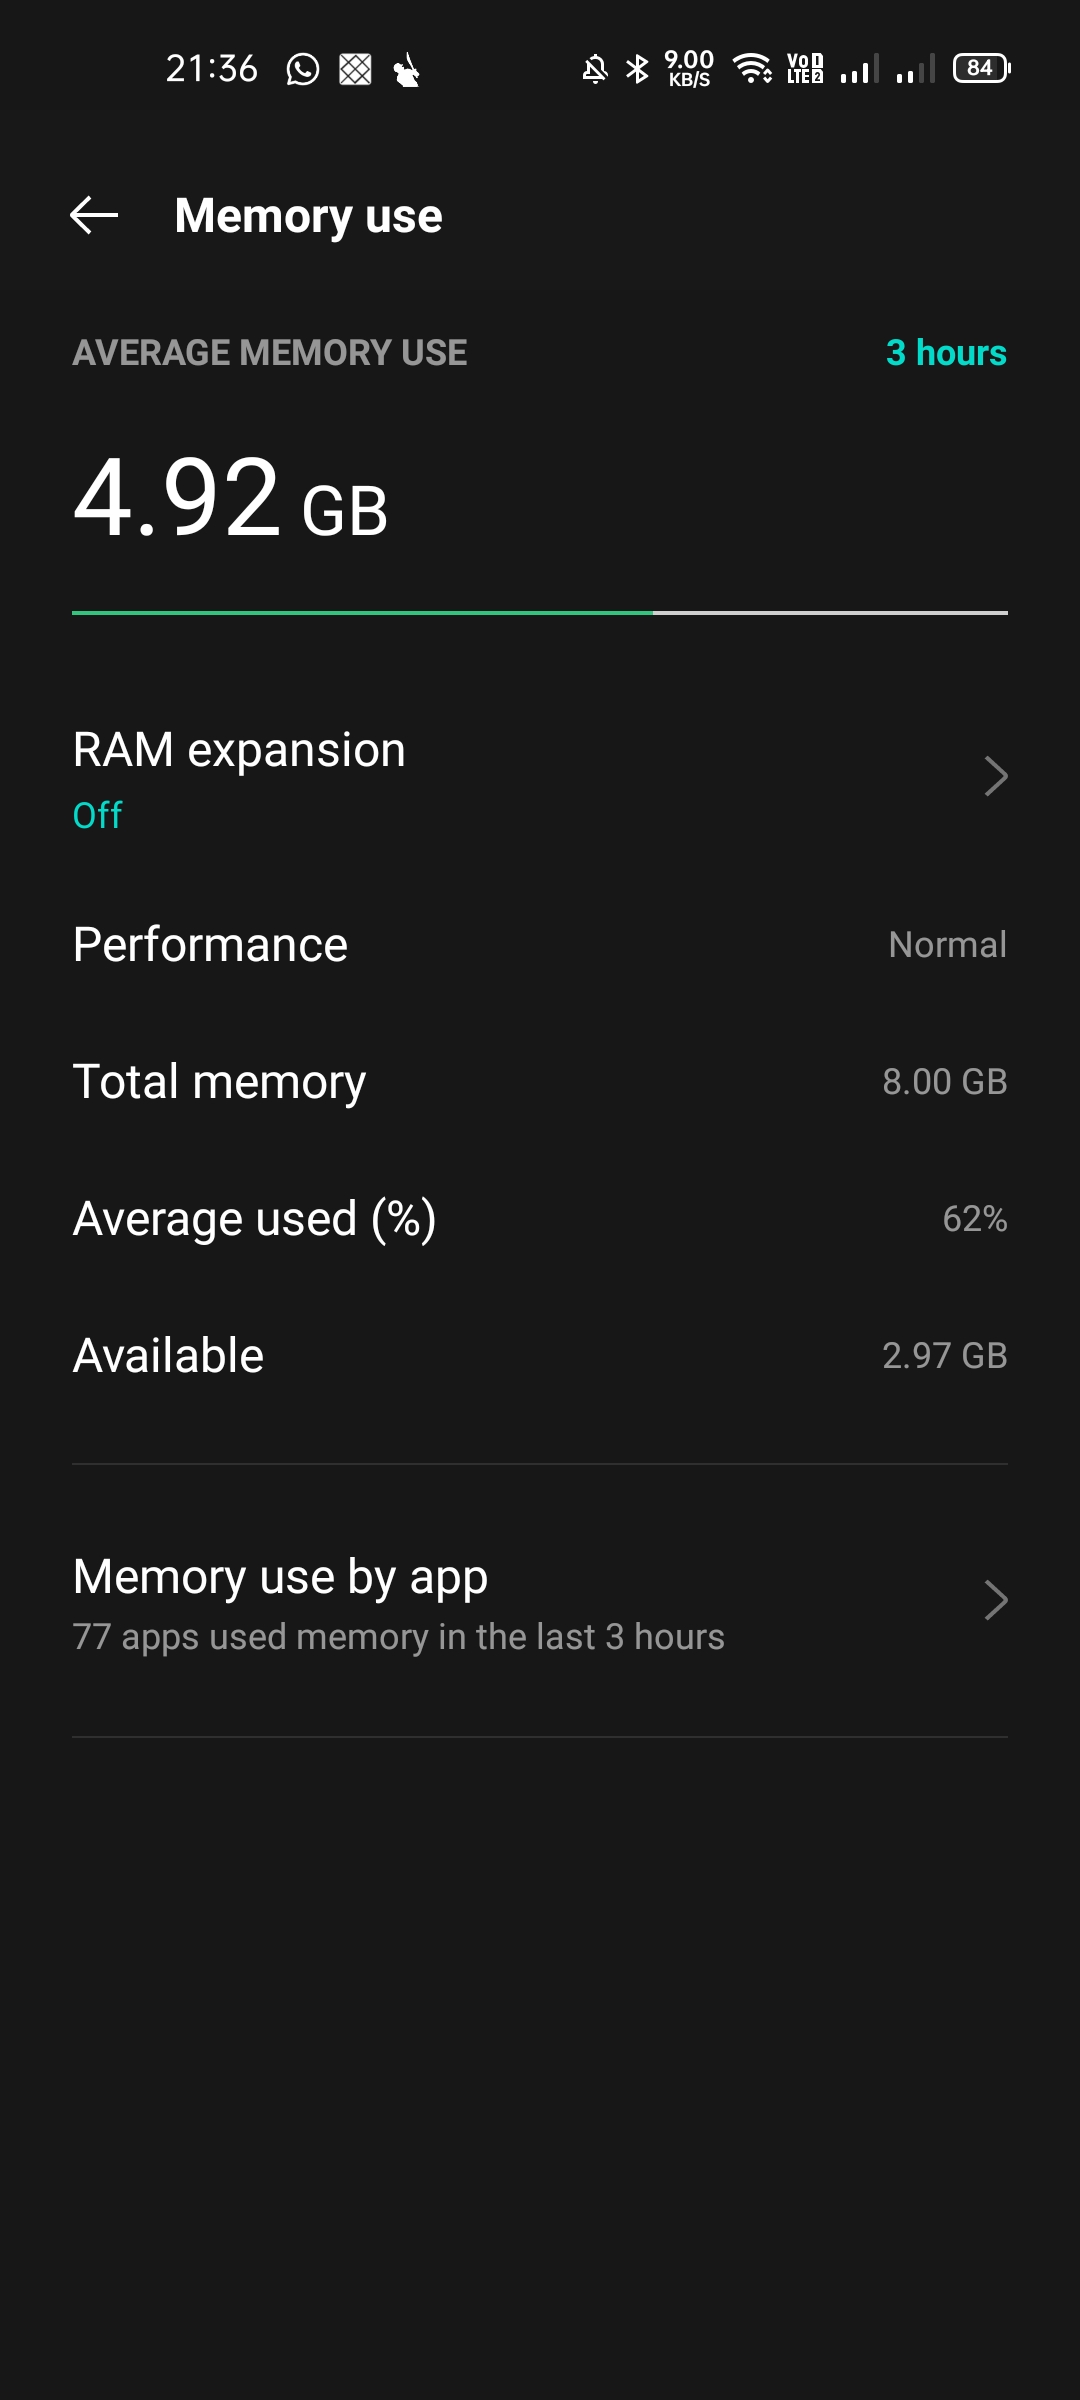 Memory used by apps